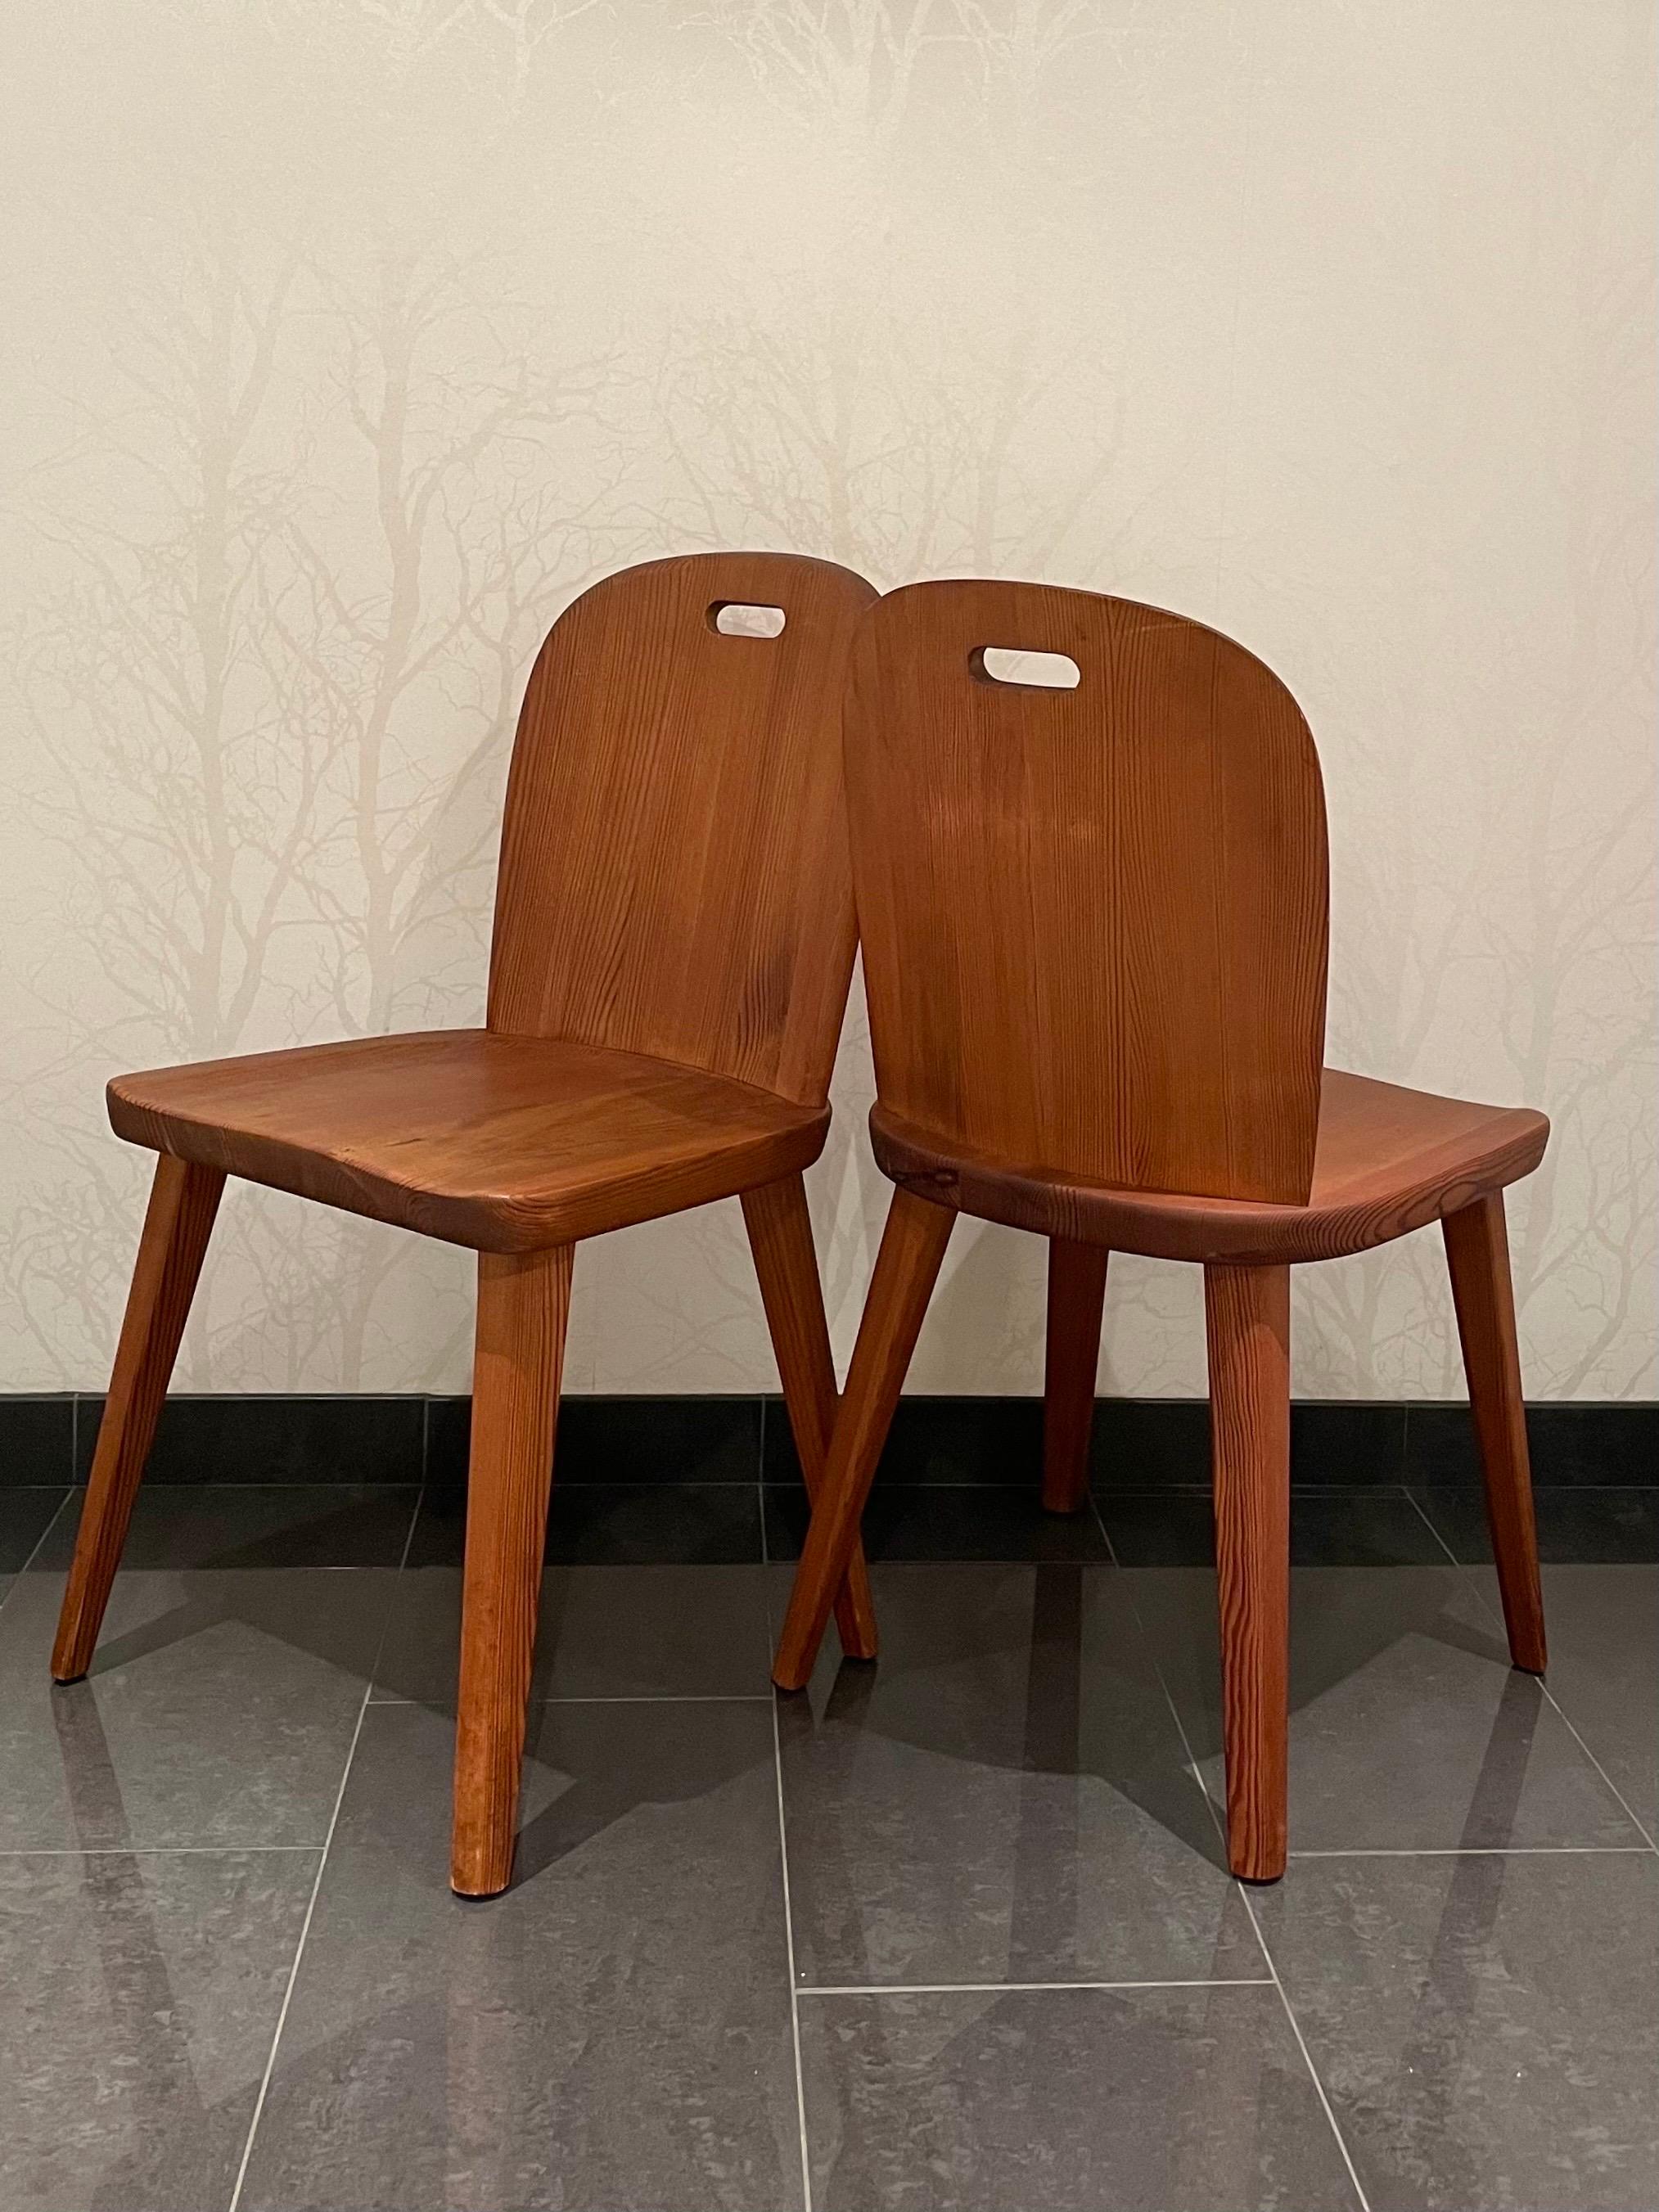 Swedish 1930s Sport Cabin Solid Pine Chairs in Axel Einar Hjorth Style by Åby Möbler  For Sale